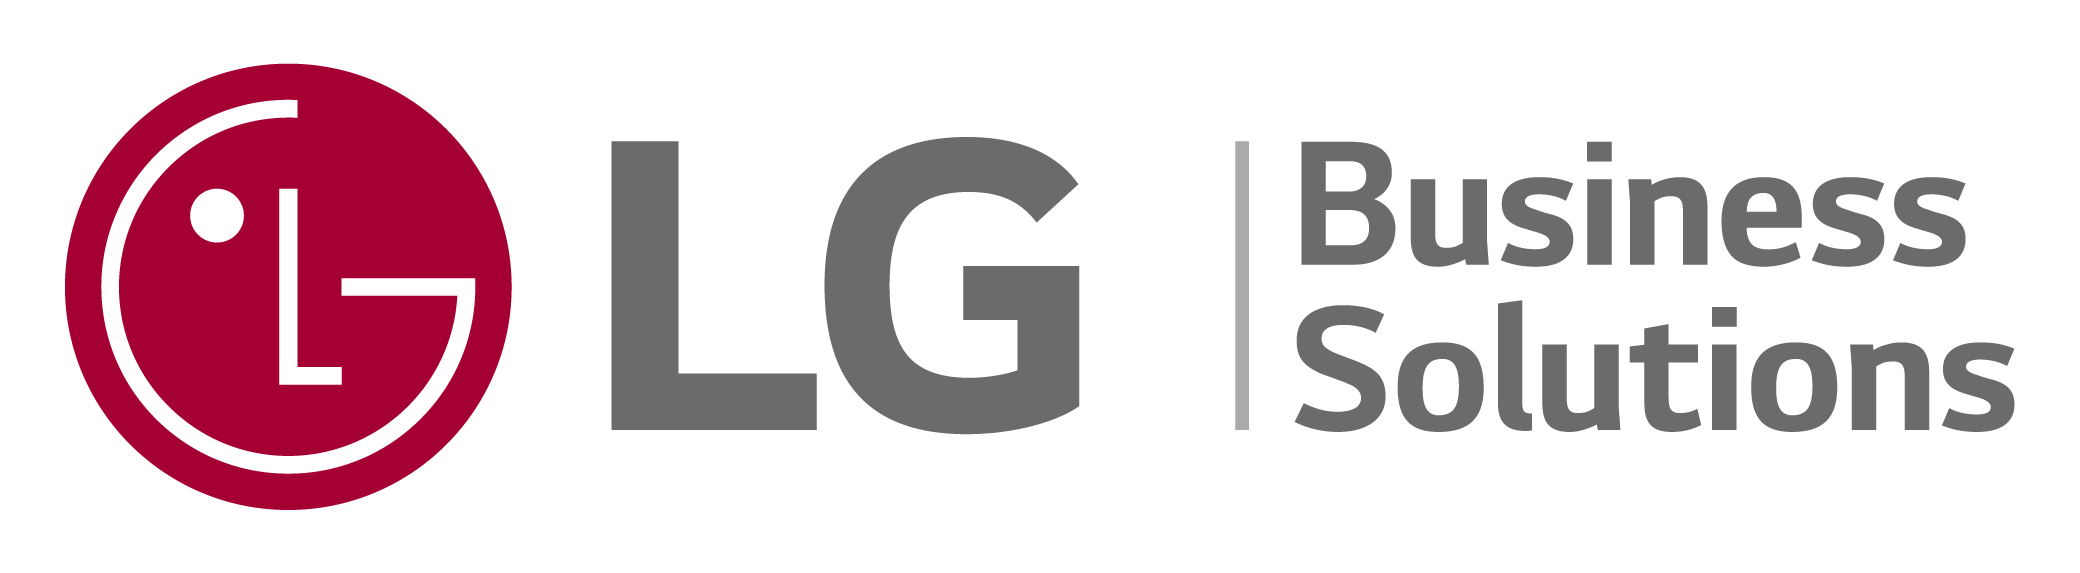 LG business solutions